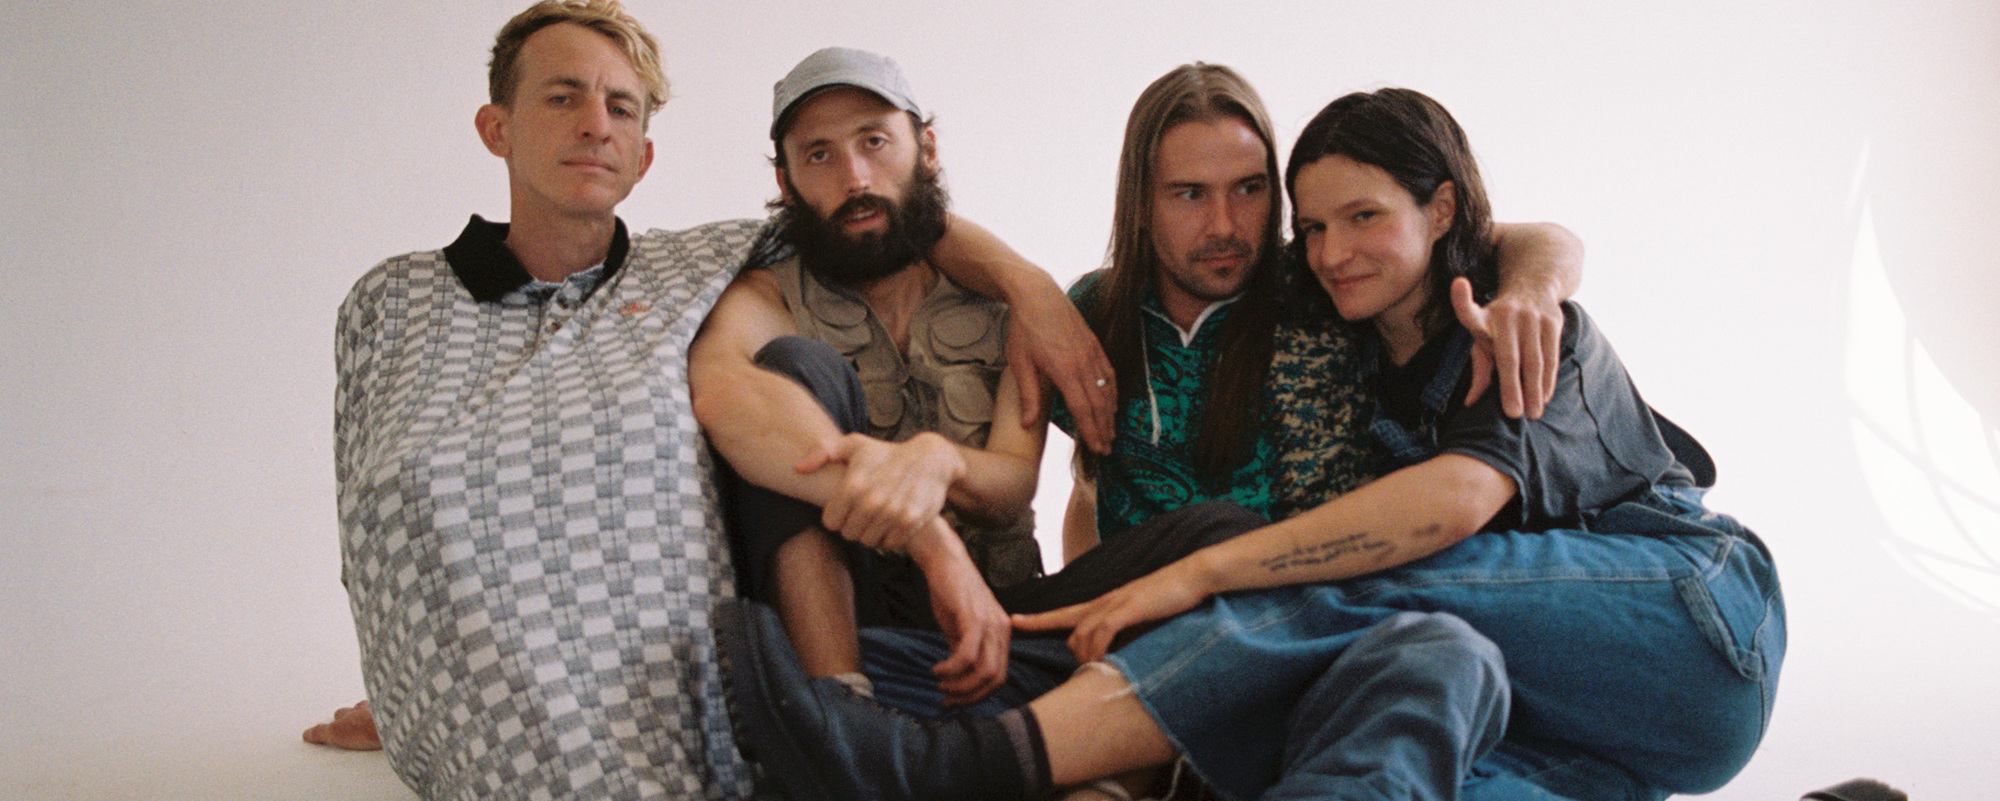 Big Thief Performs Unreleased Track “Happiness” for NPR Tiny Desk